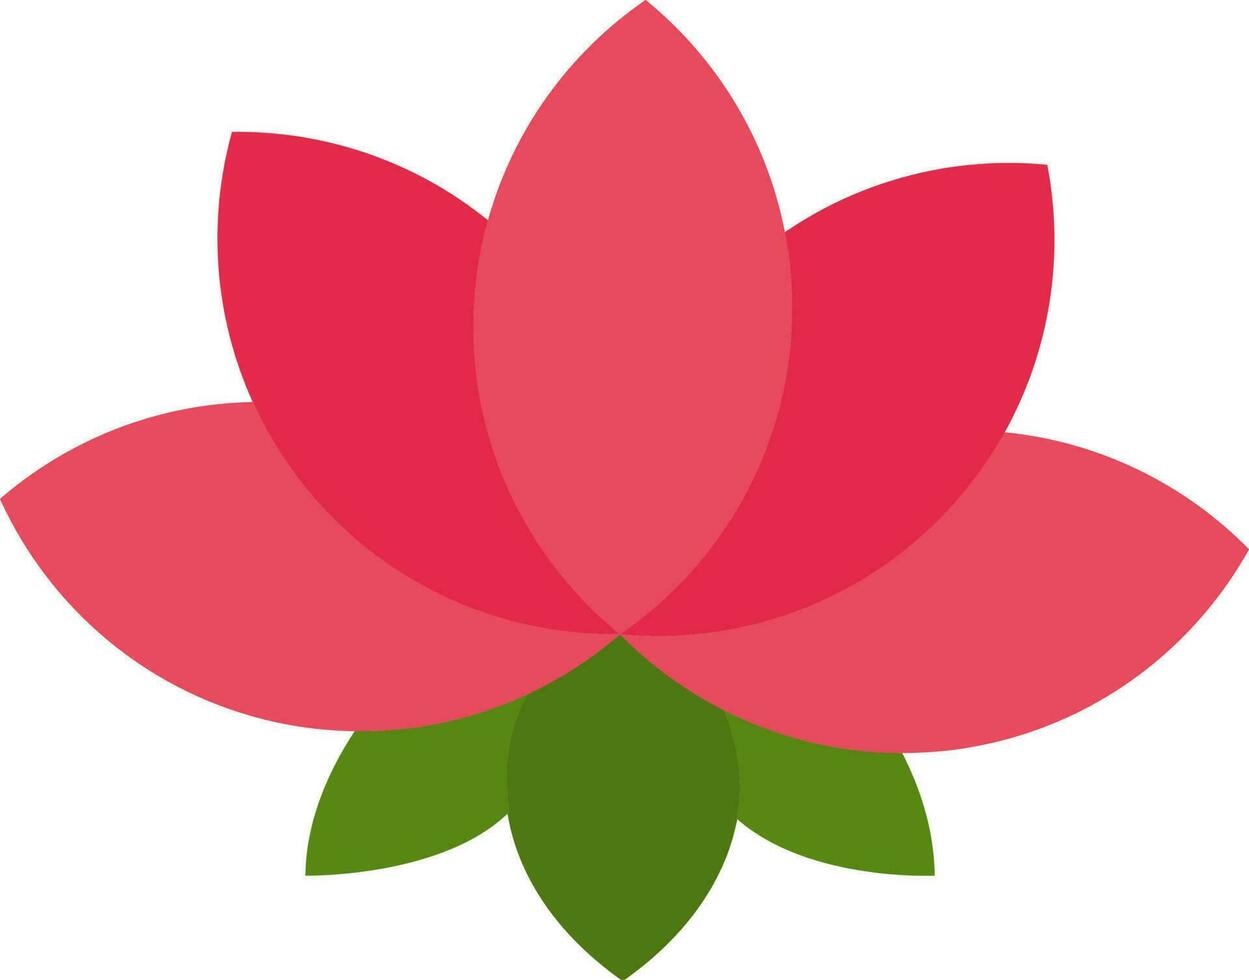 Red Lotus Flower Flat Icon Or Symbol. vector